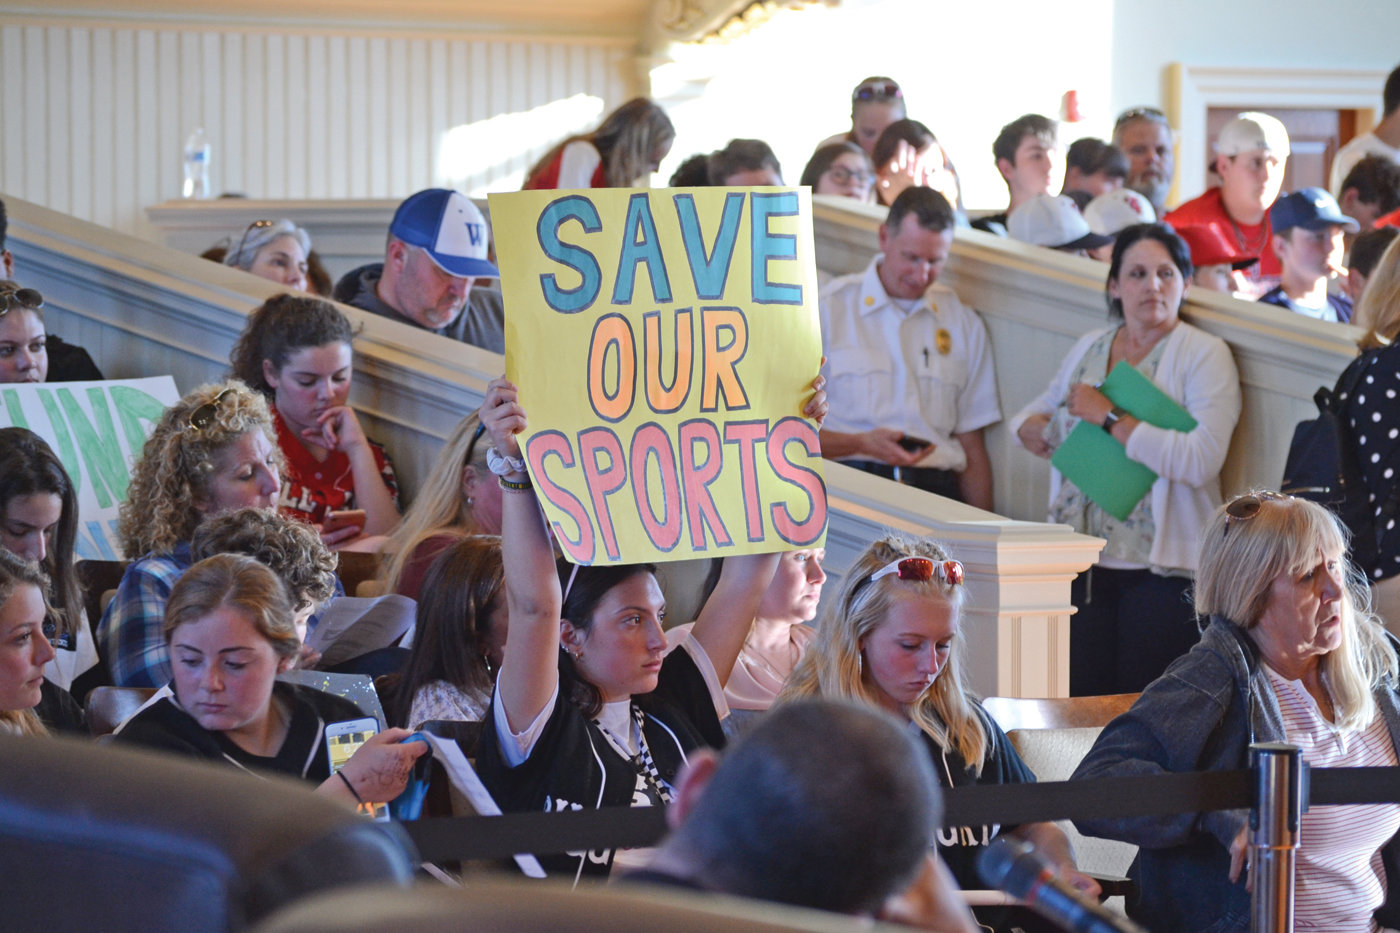 SAVE THE SPORTS: A Pilgrim High School student athlete encompasses the student position with a sign reading “Save Our Sports”